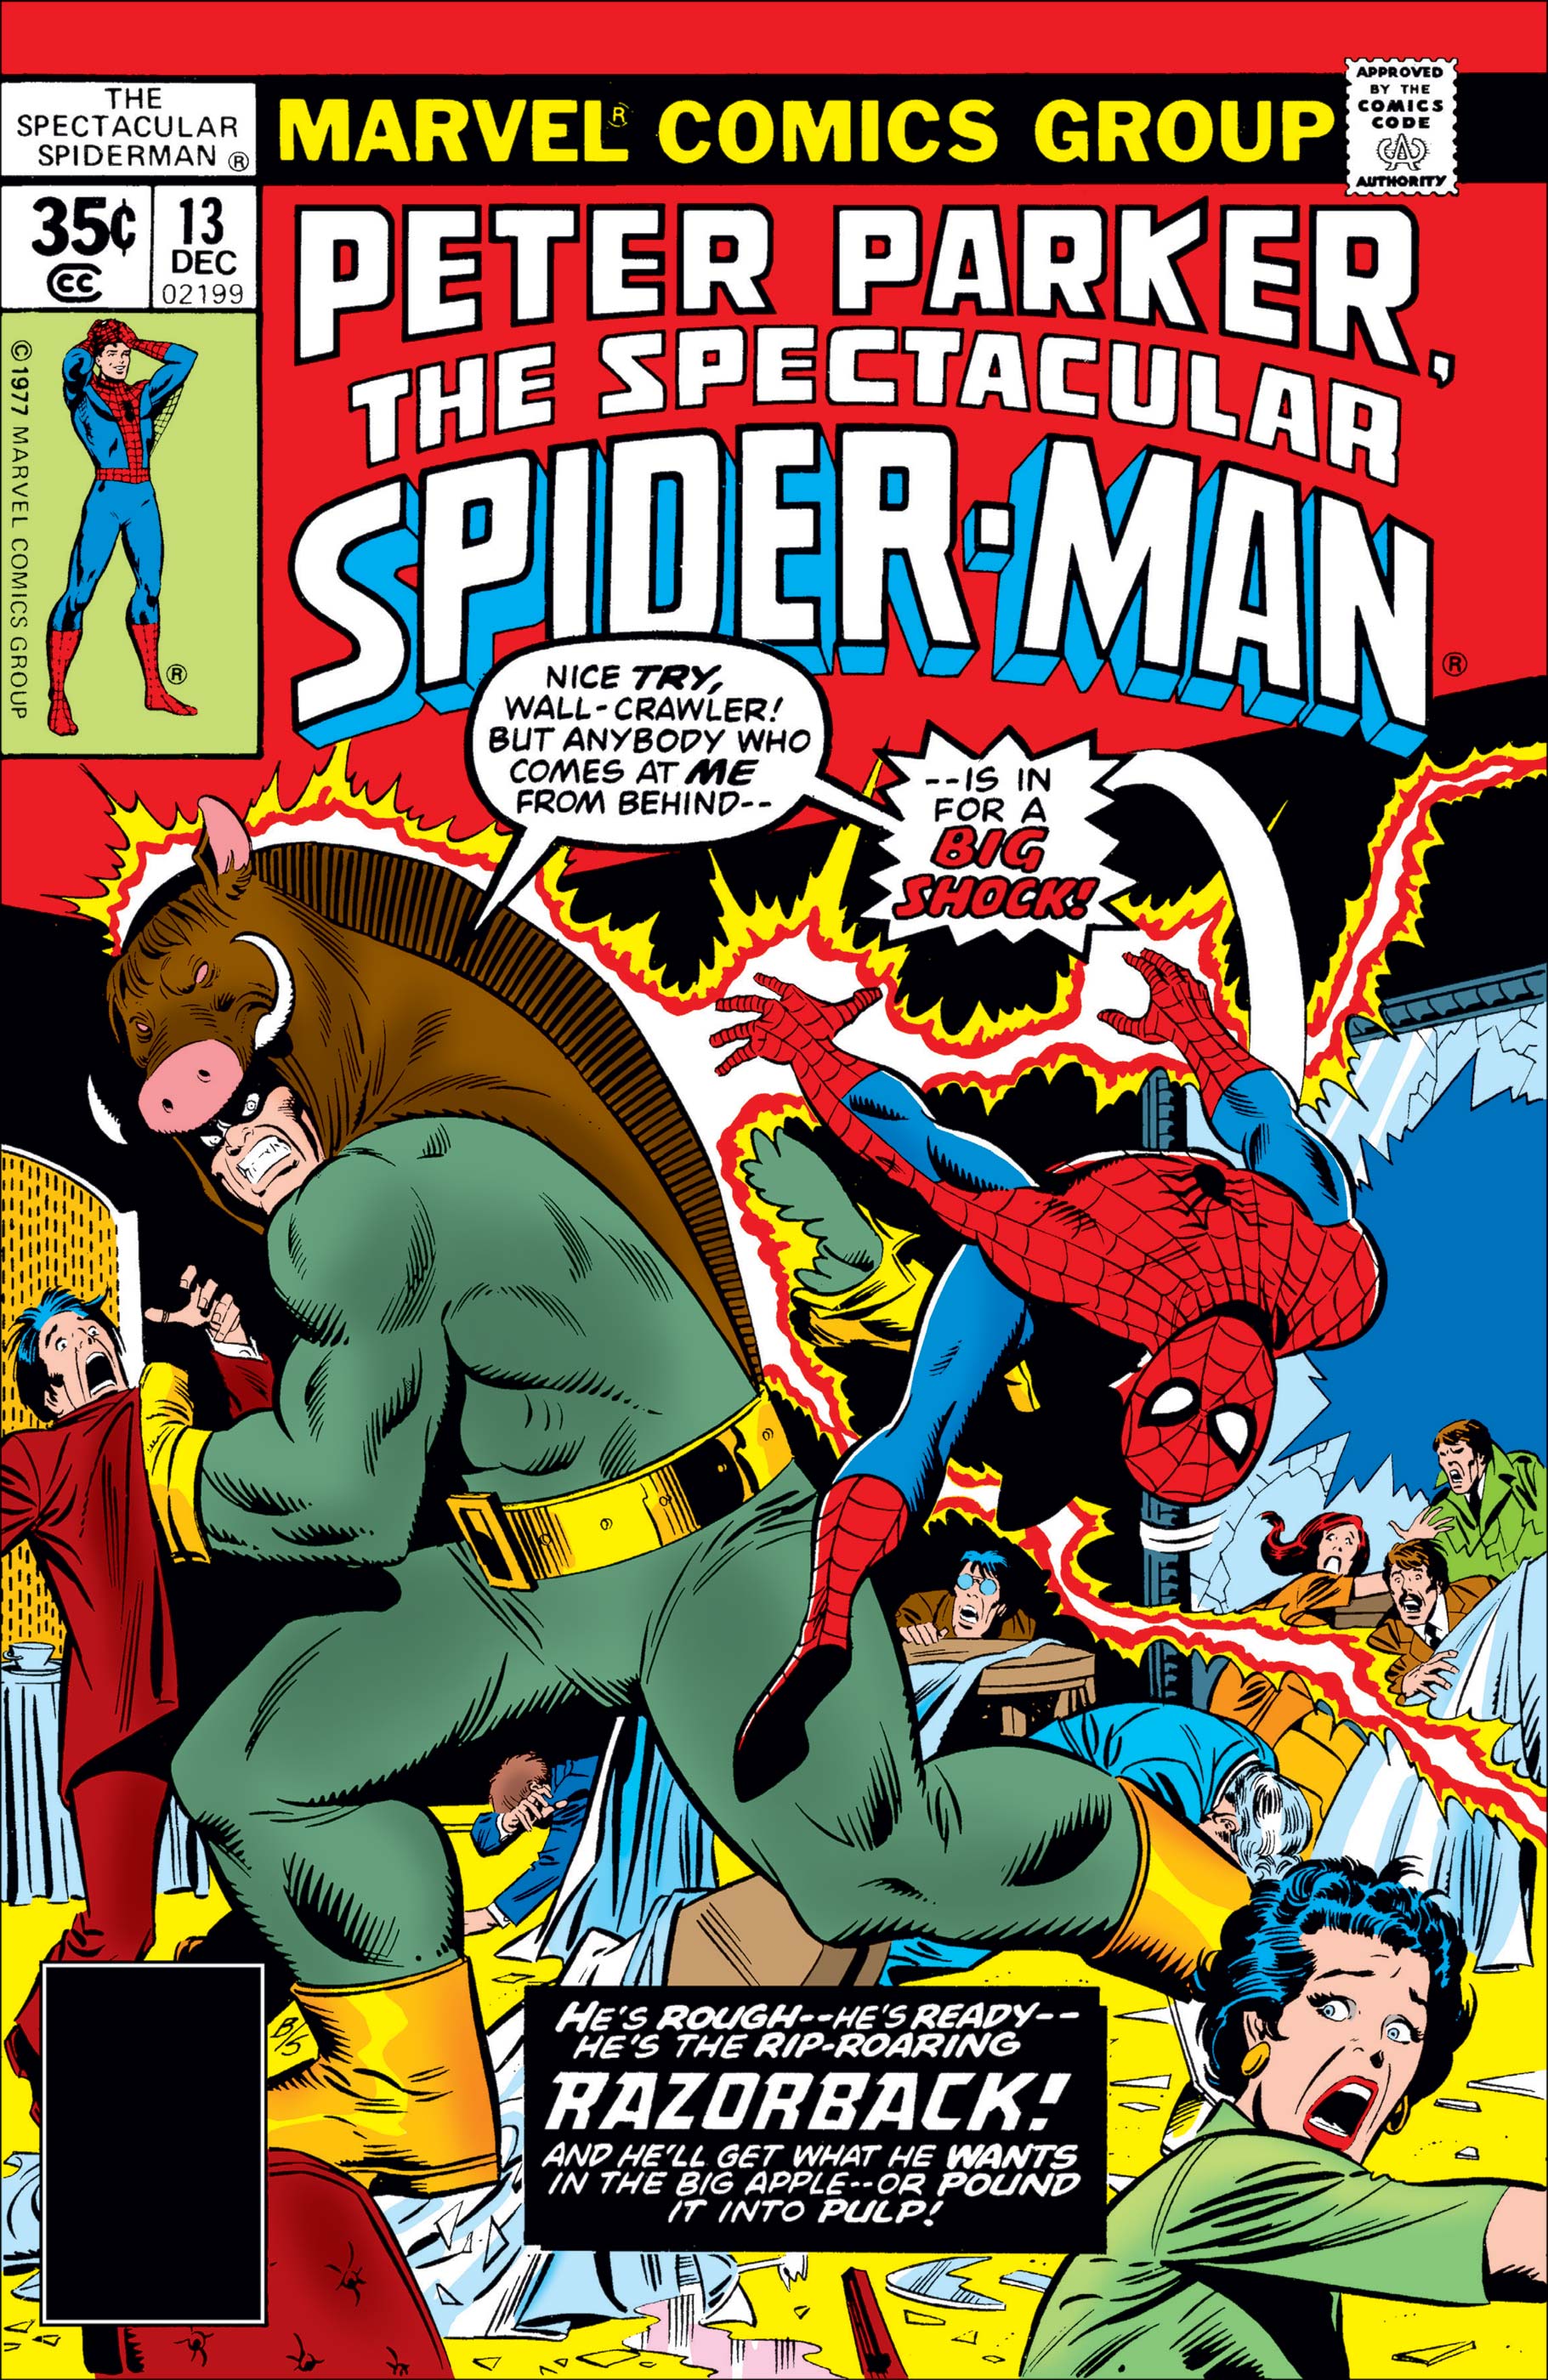 Peter Parker, the Spectacular Spider-Man (1976) #13 | Comic Issues | Marvel